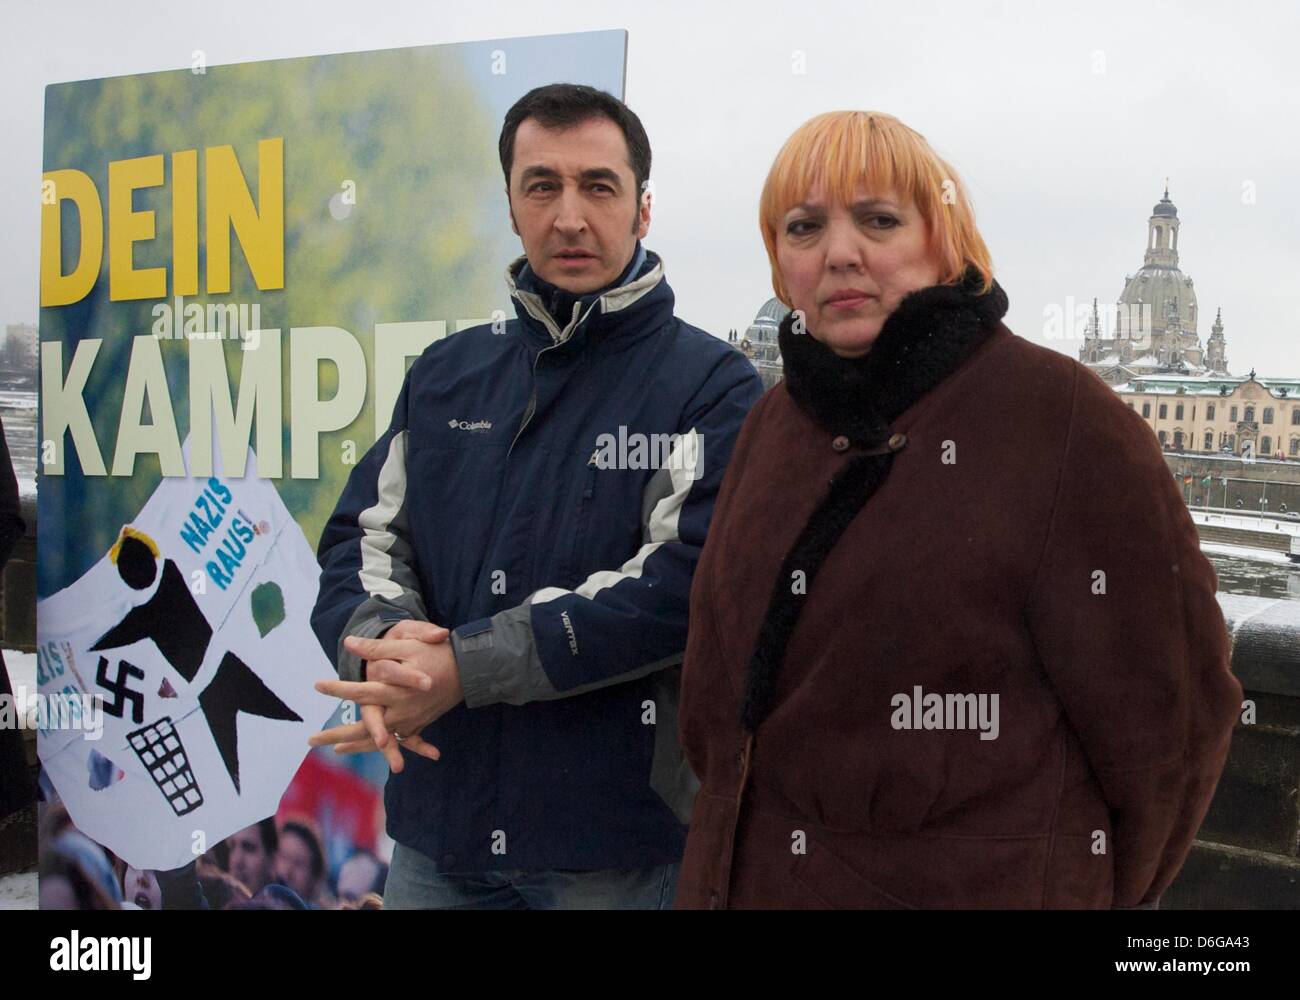 Federal chairman of the German Green Party (Buendnis 90/Die Gruenen) Cem Ozdemir (L) and chairwoman Claudia Roth pose next to an anti-Nazi poster saying 'Dein Kampf' (Your fight) in Dresden, Germany, 13 February 2012.  On 13 February, citizens of Dresden commemorate German victims of the Second World War who died during aerial attacks. Photo: Peter Endig Stock Photo